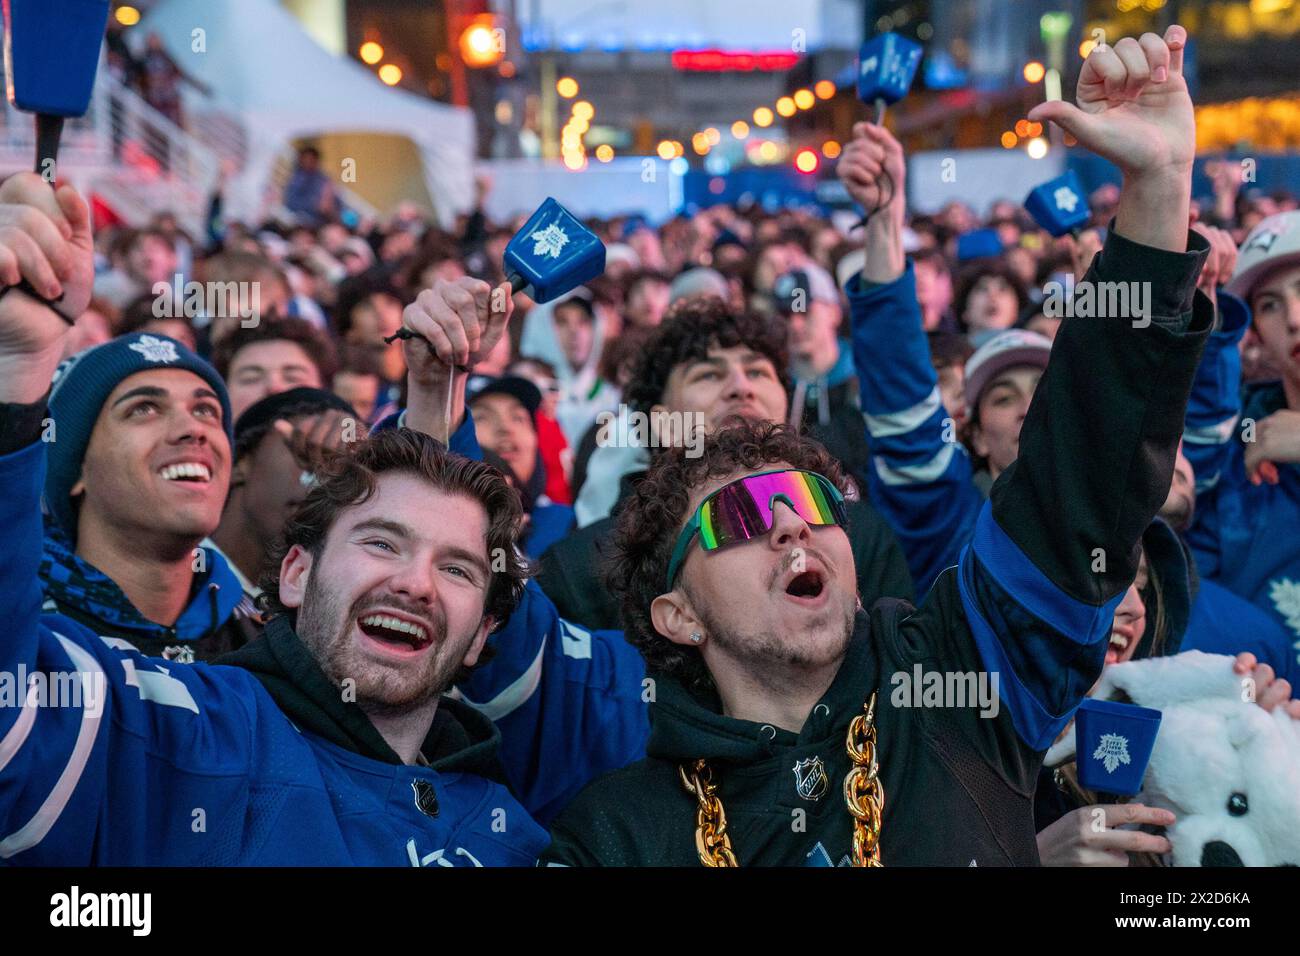 Fans watching the game on a giant screen react as the Toronto Maple Leafs score a goal against Boston Bruins, at Maple Leaf Square outside Scotiabank Arena. During Toronto Maple Leafs playoff games, Maple Leaf Square transforms into a sea of blue and white, echoing with the chants of passionate fans eagerly rallying behind their team's quest for victory. The electric atmosphere radiates anticipation and excitement, creating unforgettable memories for both die-hard supporters and casual observers alike. (Photo by Shawn Goldberg/SOPA Images/Sipa USA) Stock Photo